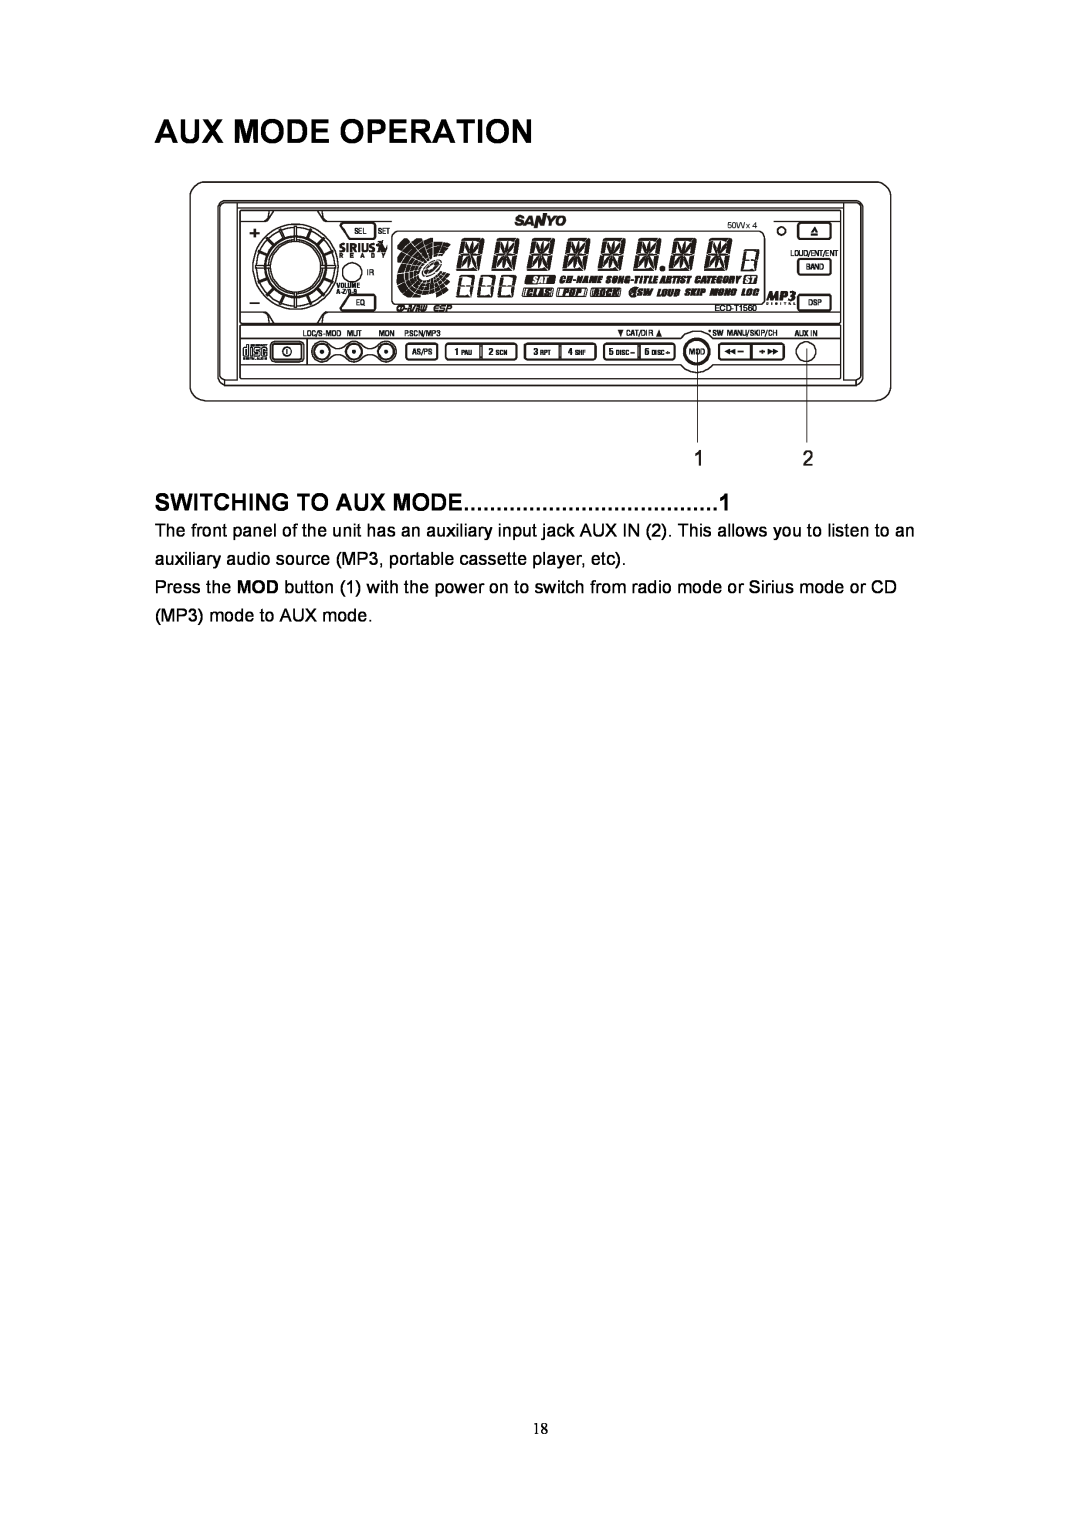 Sanyo ECD-T1560 manual Aux Mode Operation, Switching To Aux Mode 